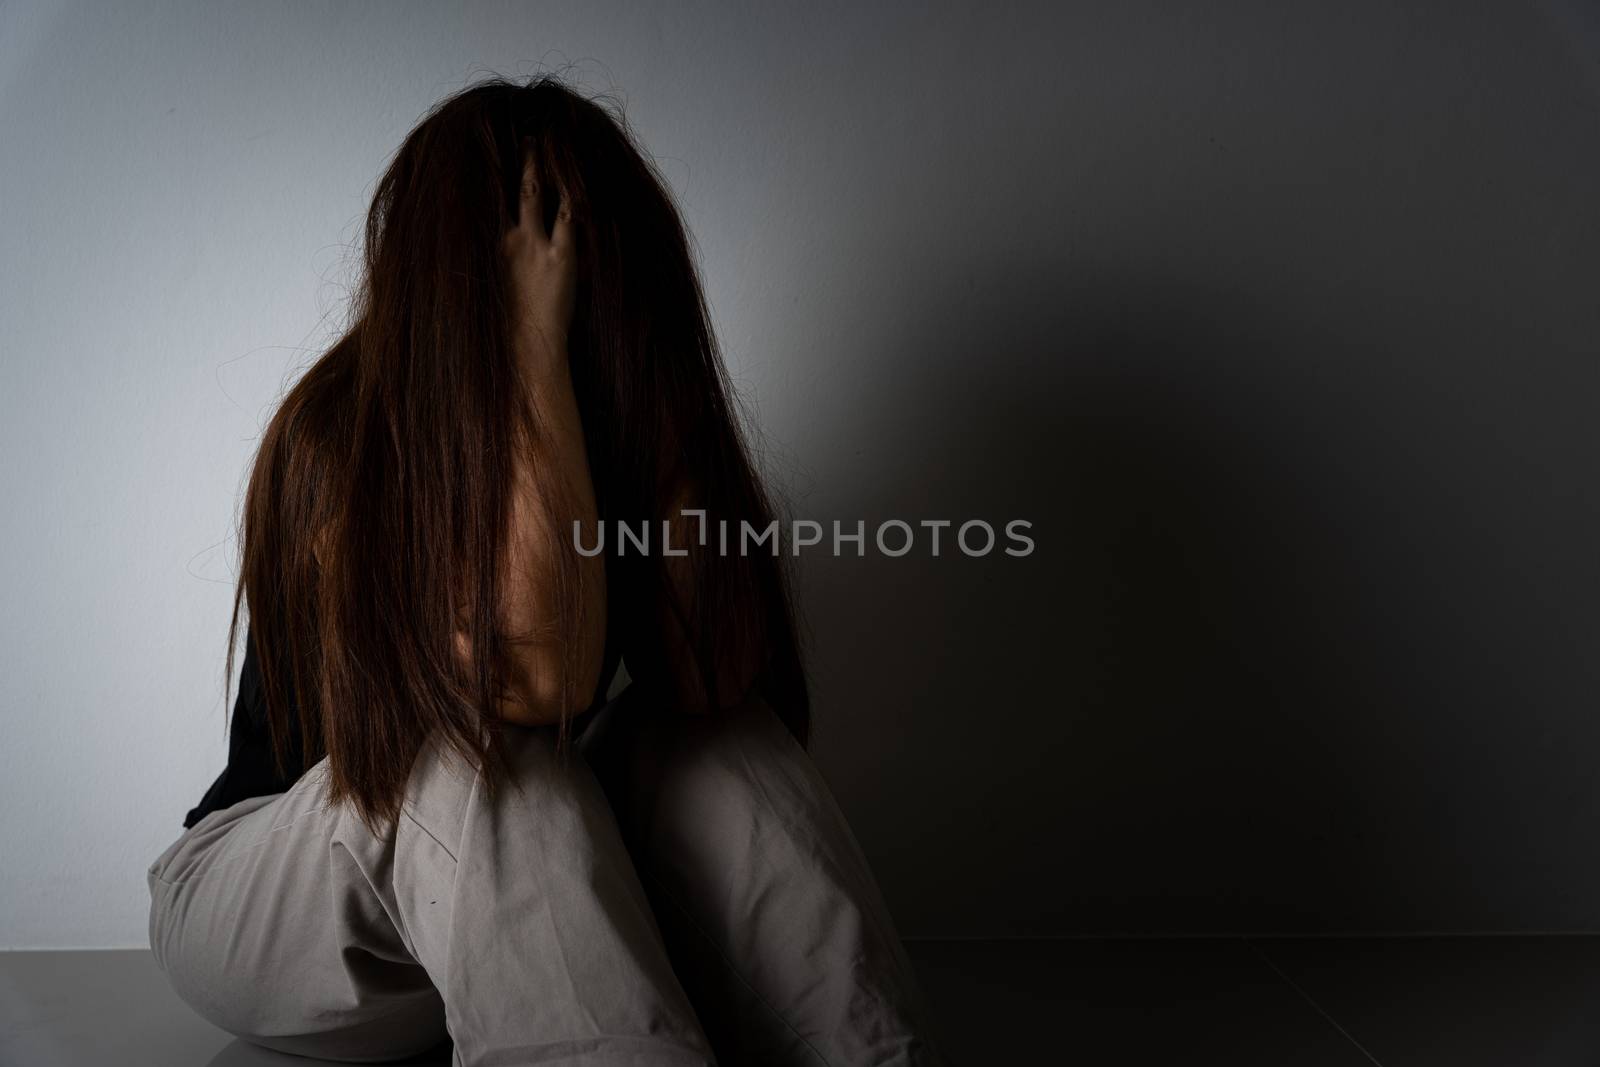 sad woman hug her knee and cry sitting alone in a dark room. Depression, unhappy, stressed and anxiety disorder concept.